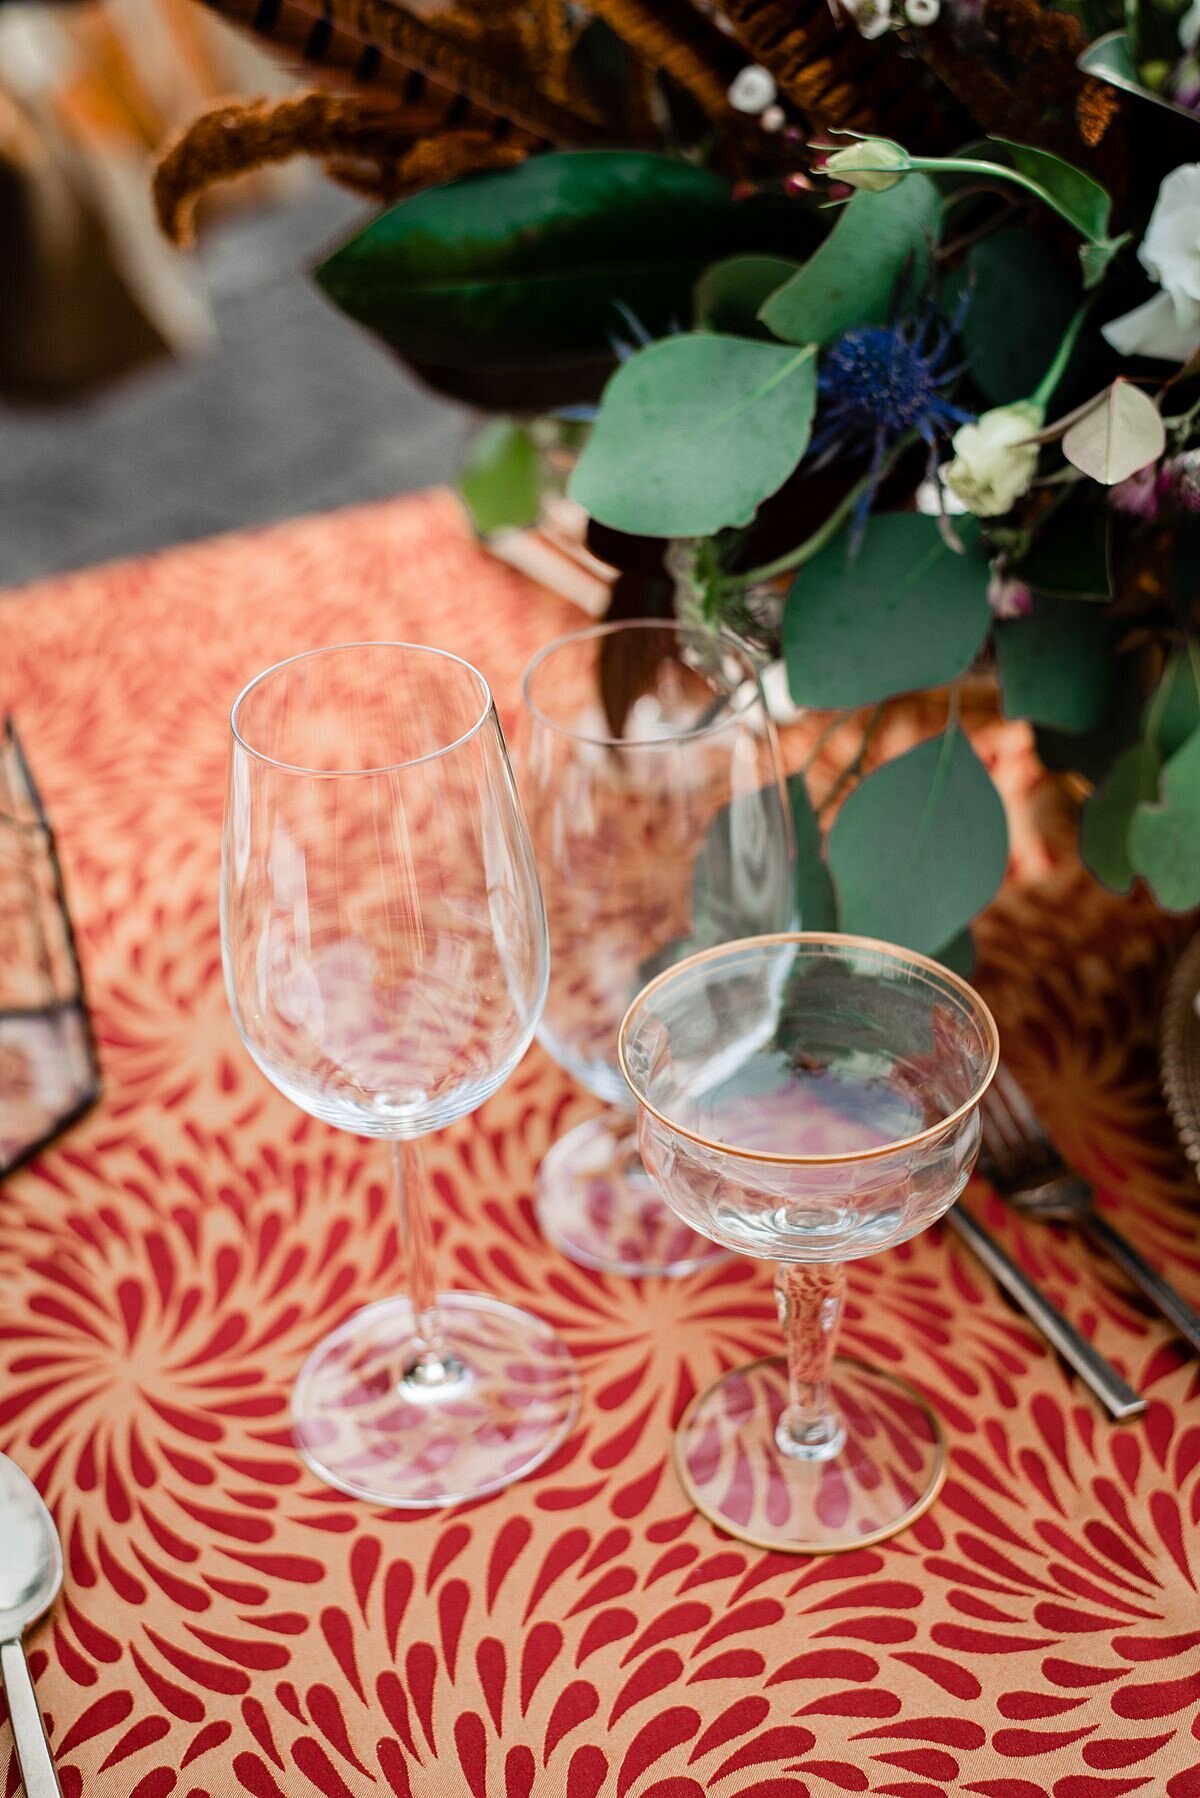 A stemmed red wine glass, a stemmed white wine glass and a gold rimmed coupe glass sit on an orange and rust textured table cloth next to a centerpiece of greenery at Rippa Villa.